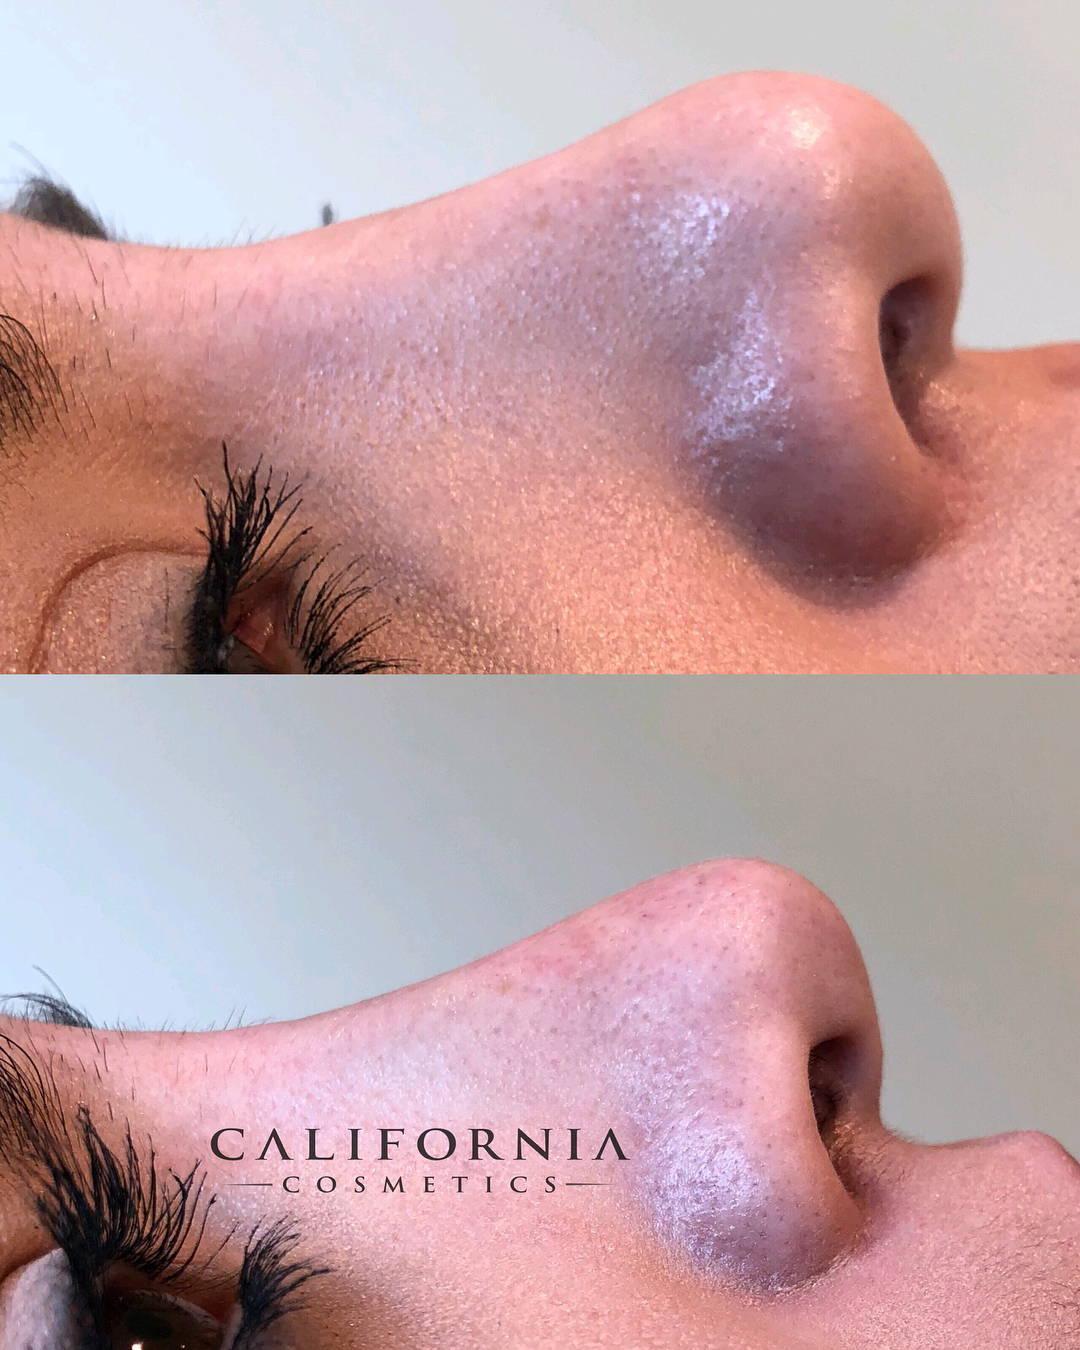 Woman's nose before and after nonsurgical nose job